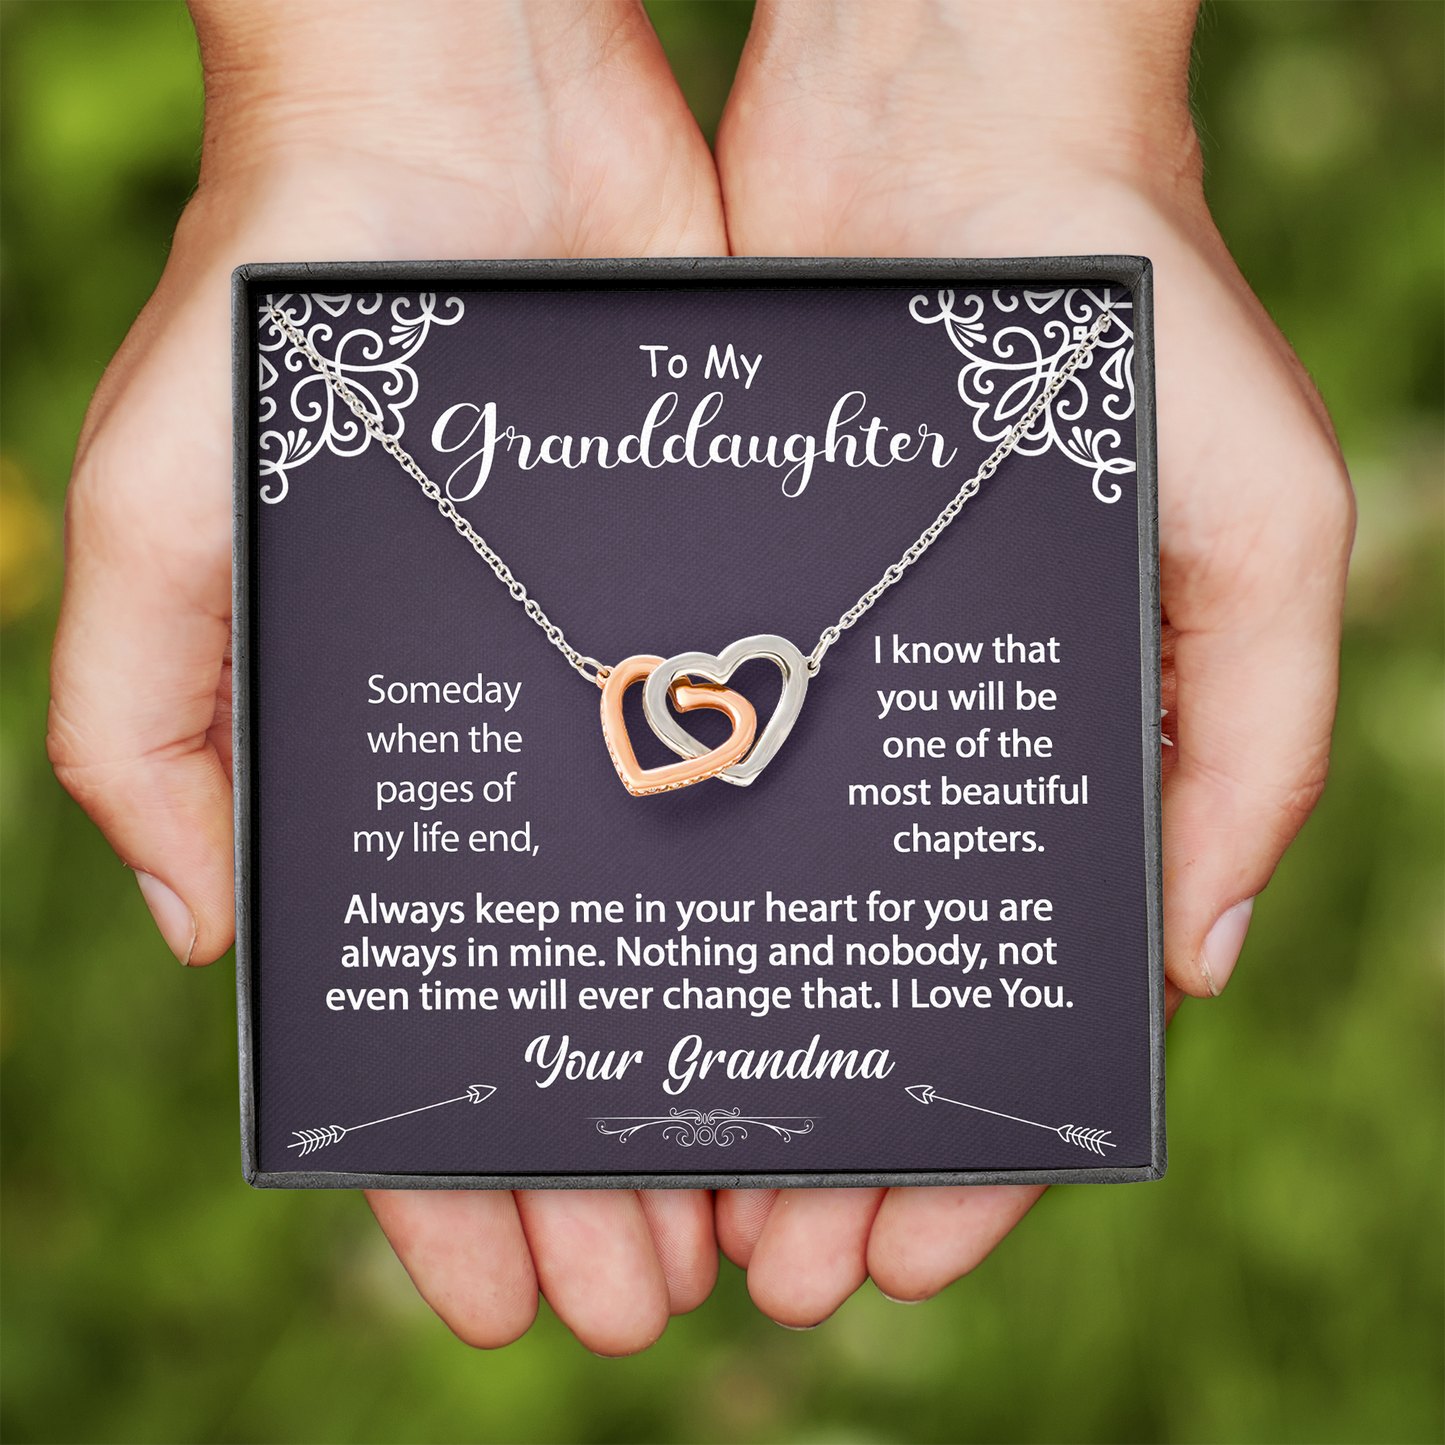 To My Granddaughter Necklace - When the pages of my life end - Interlocking Hearts #e58